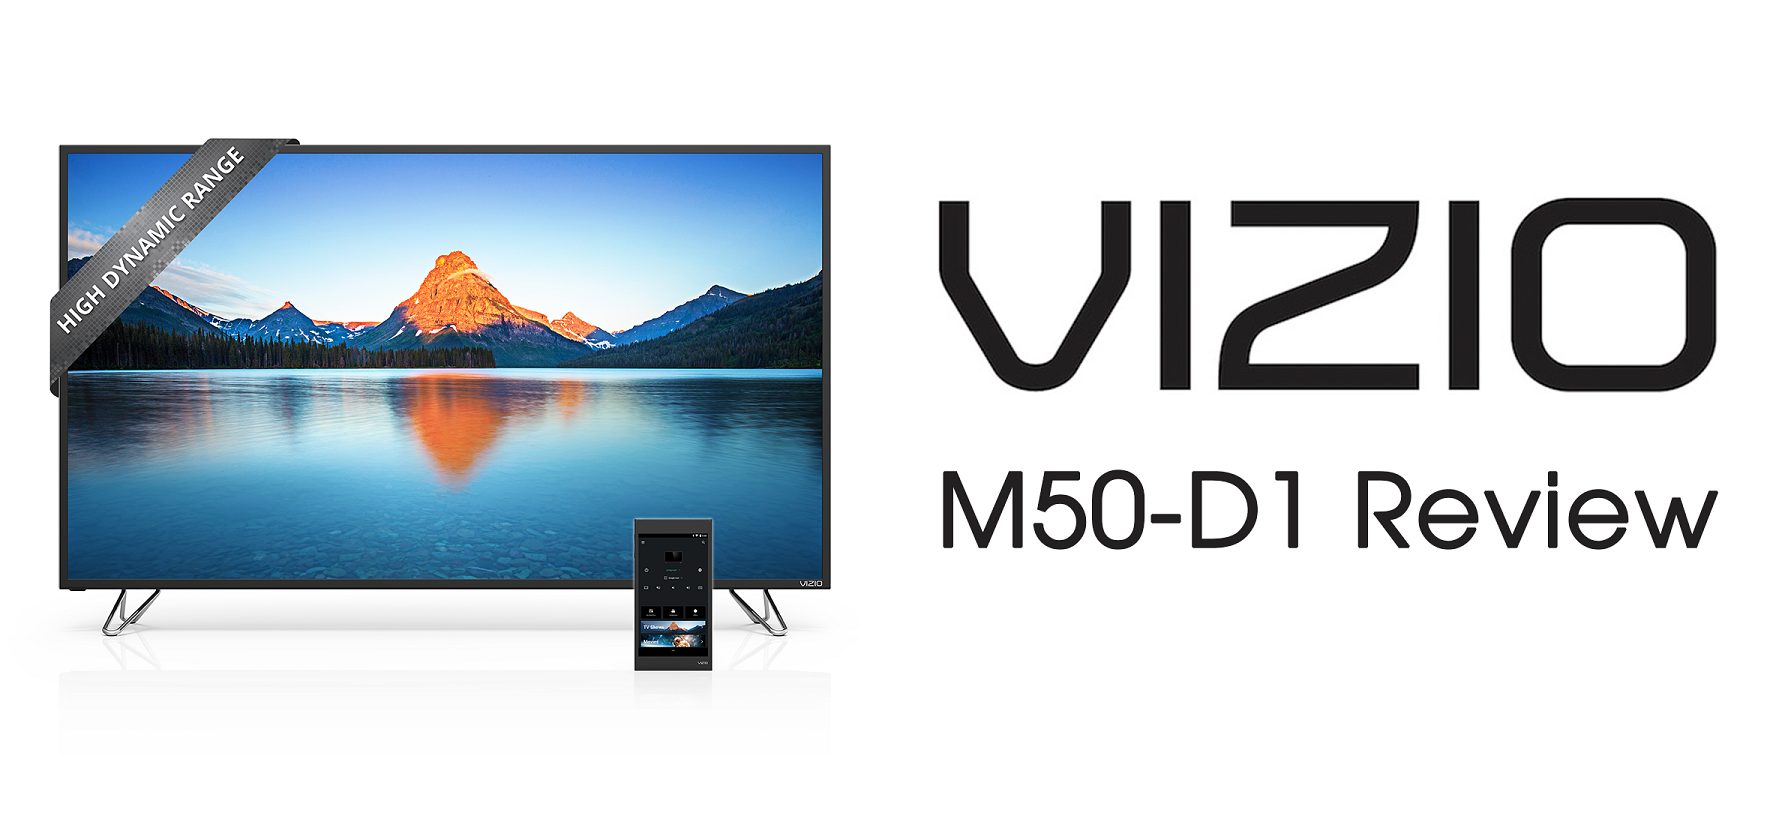 Images provided by VIZIO